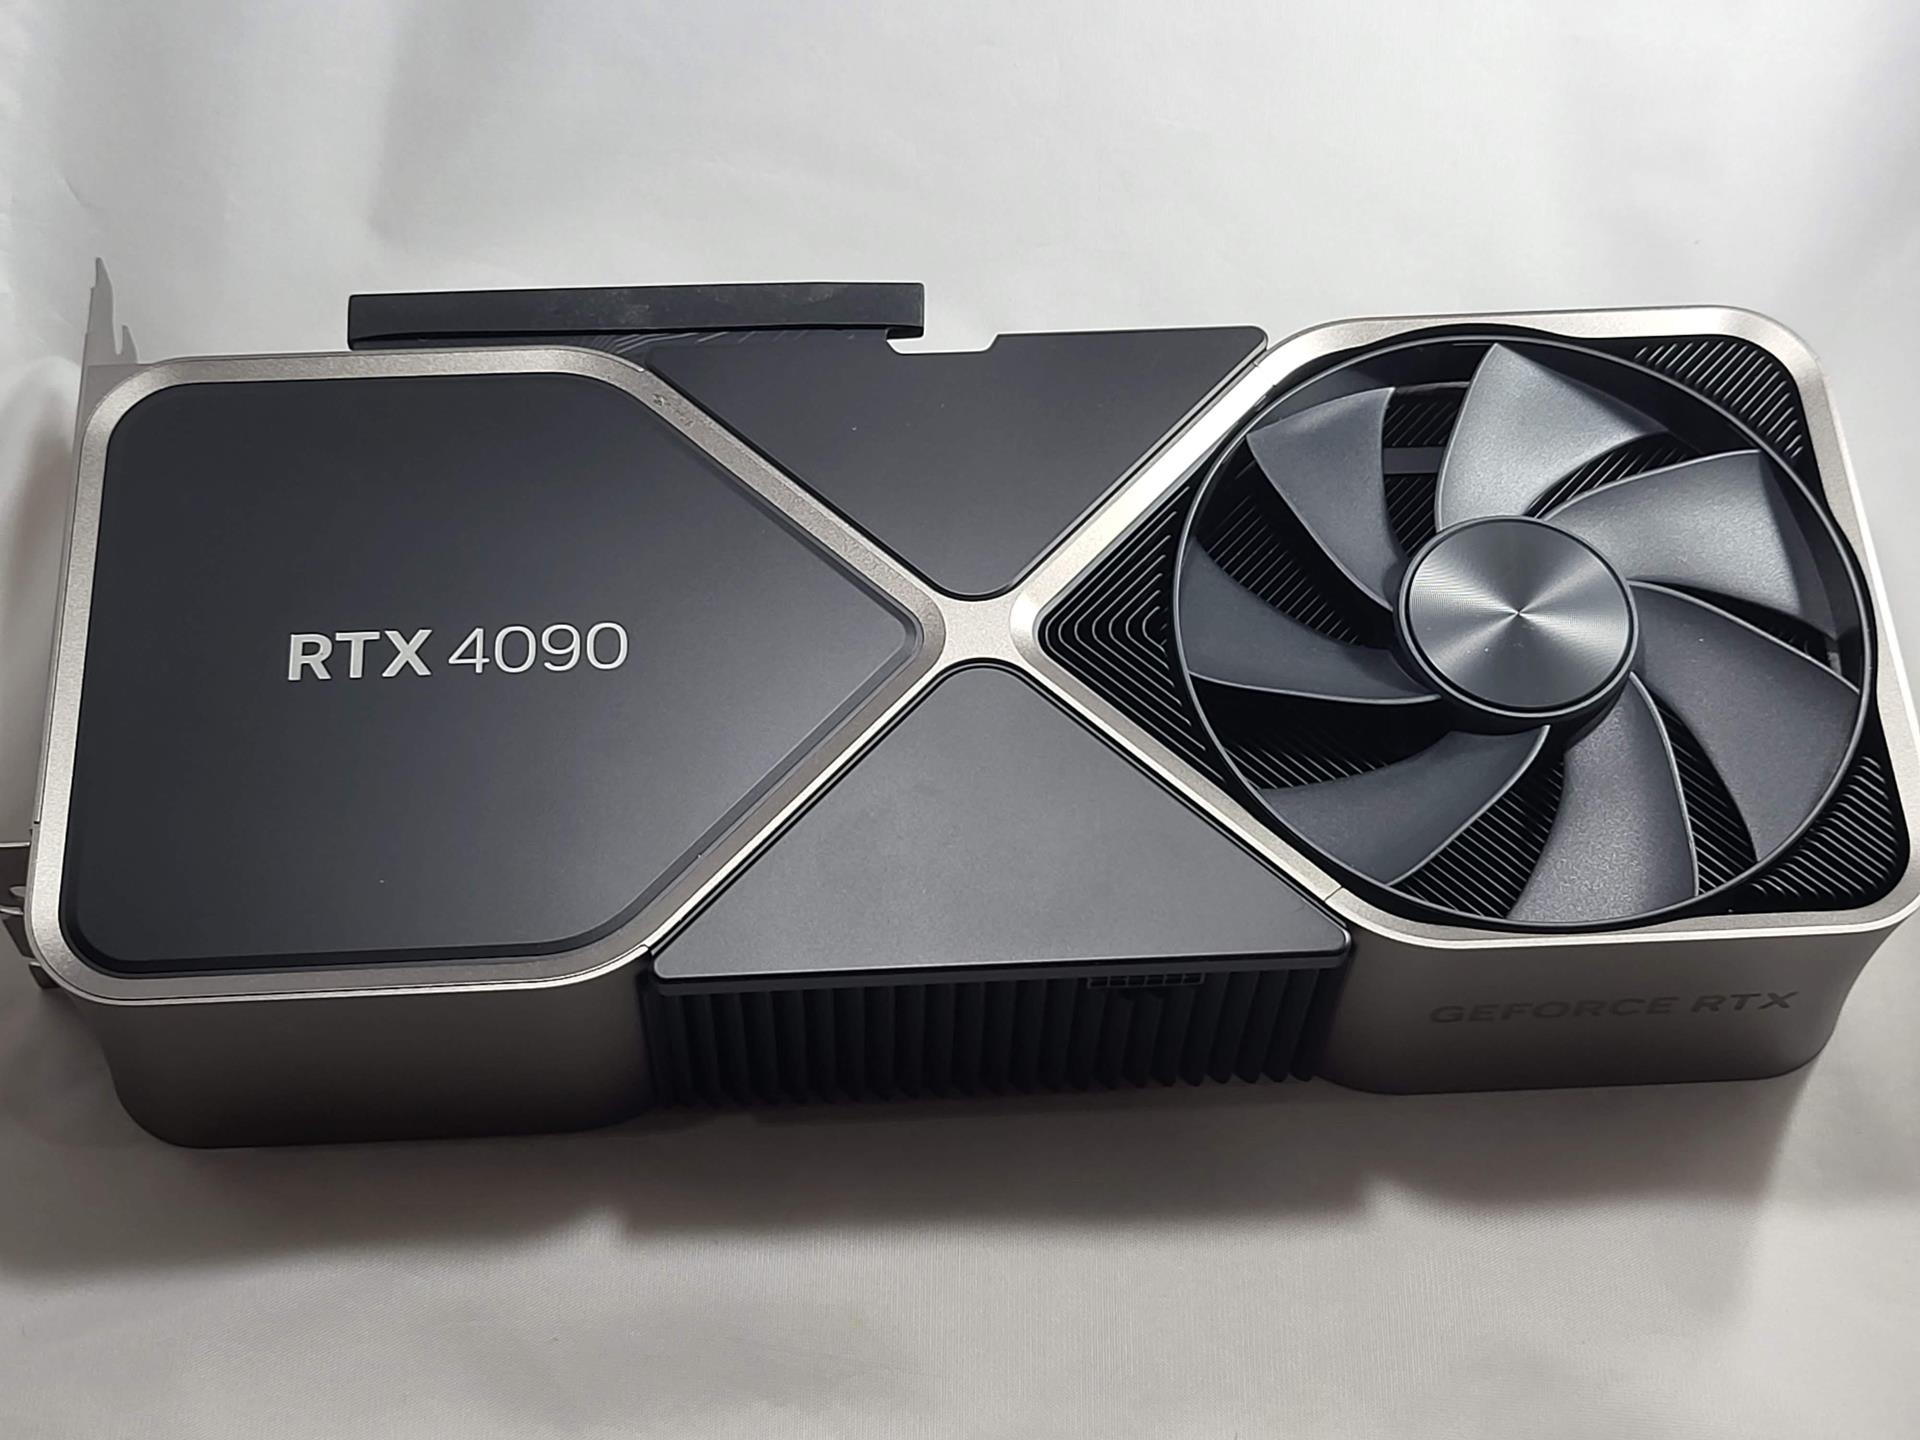 Nvidia GeForce RTX 4090 Review: Too much too soon - Reviewed